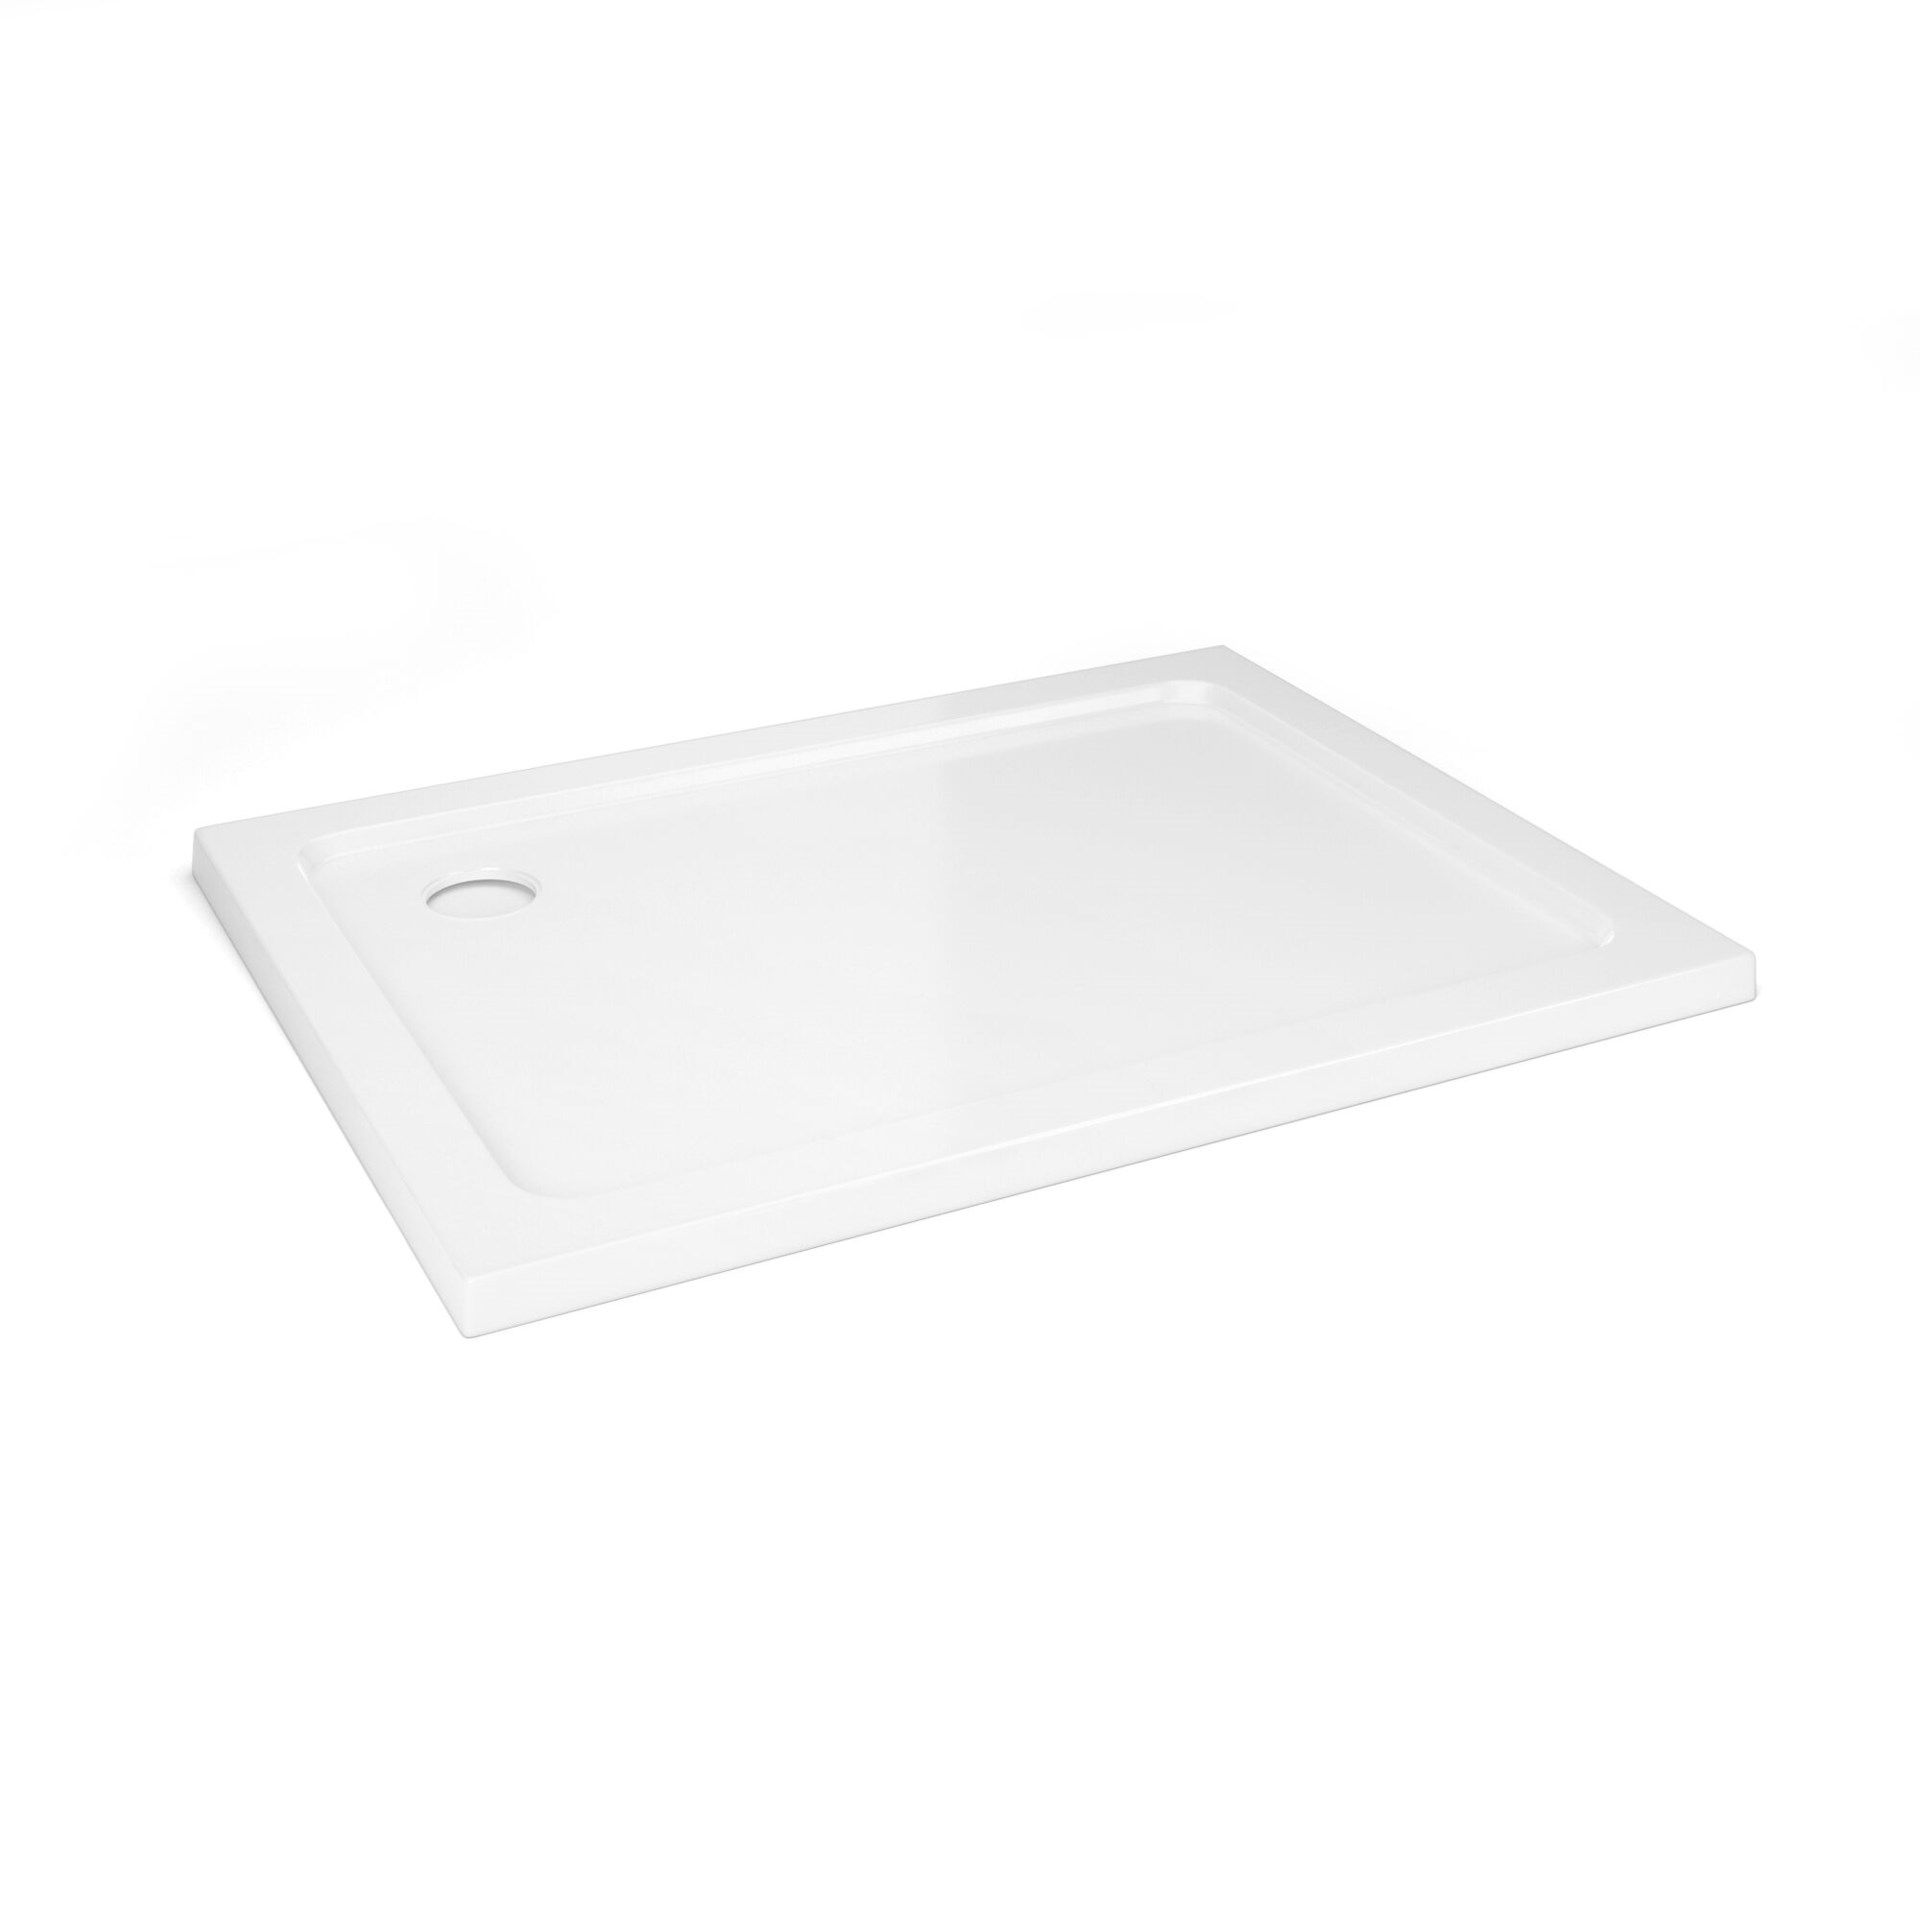 (PC131) 1000x760mm Rectangular Stone Shower Tray - Ultra Slim. RRP £299.99.Low profile ultra s...( - Image 2 of 2